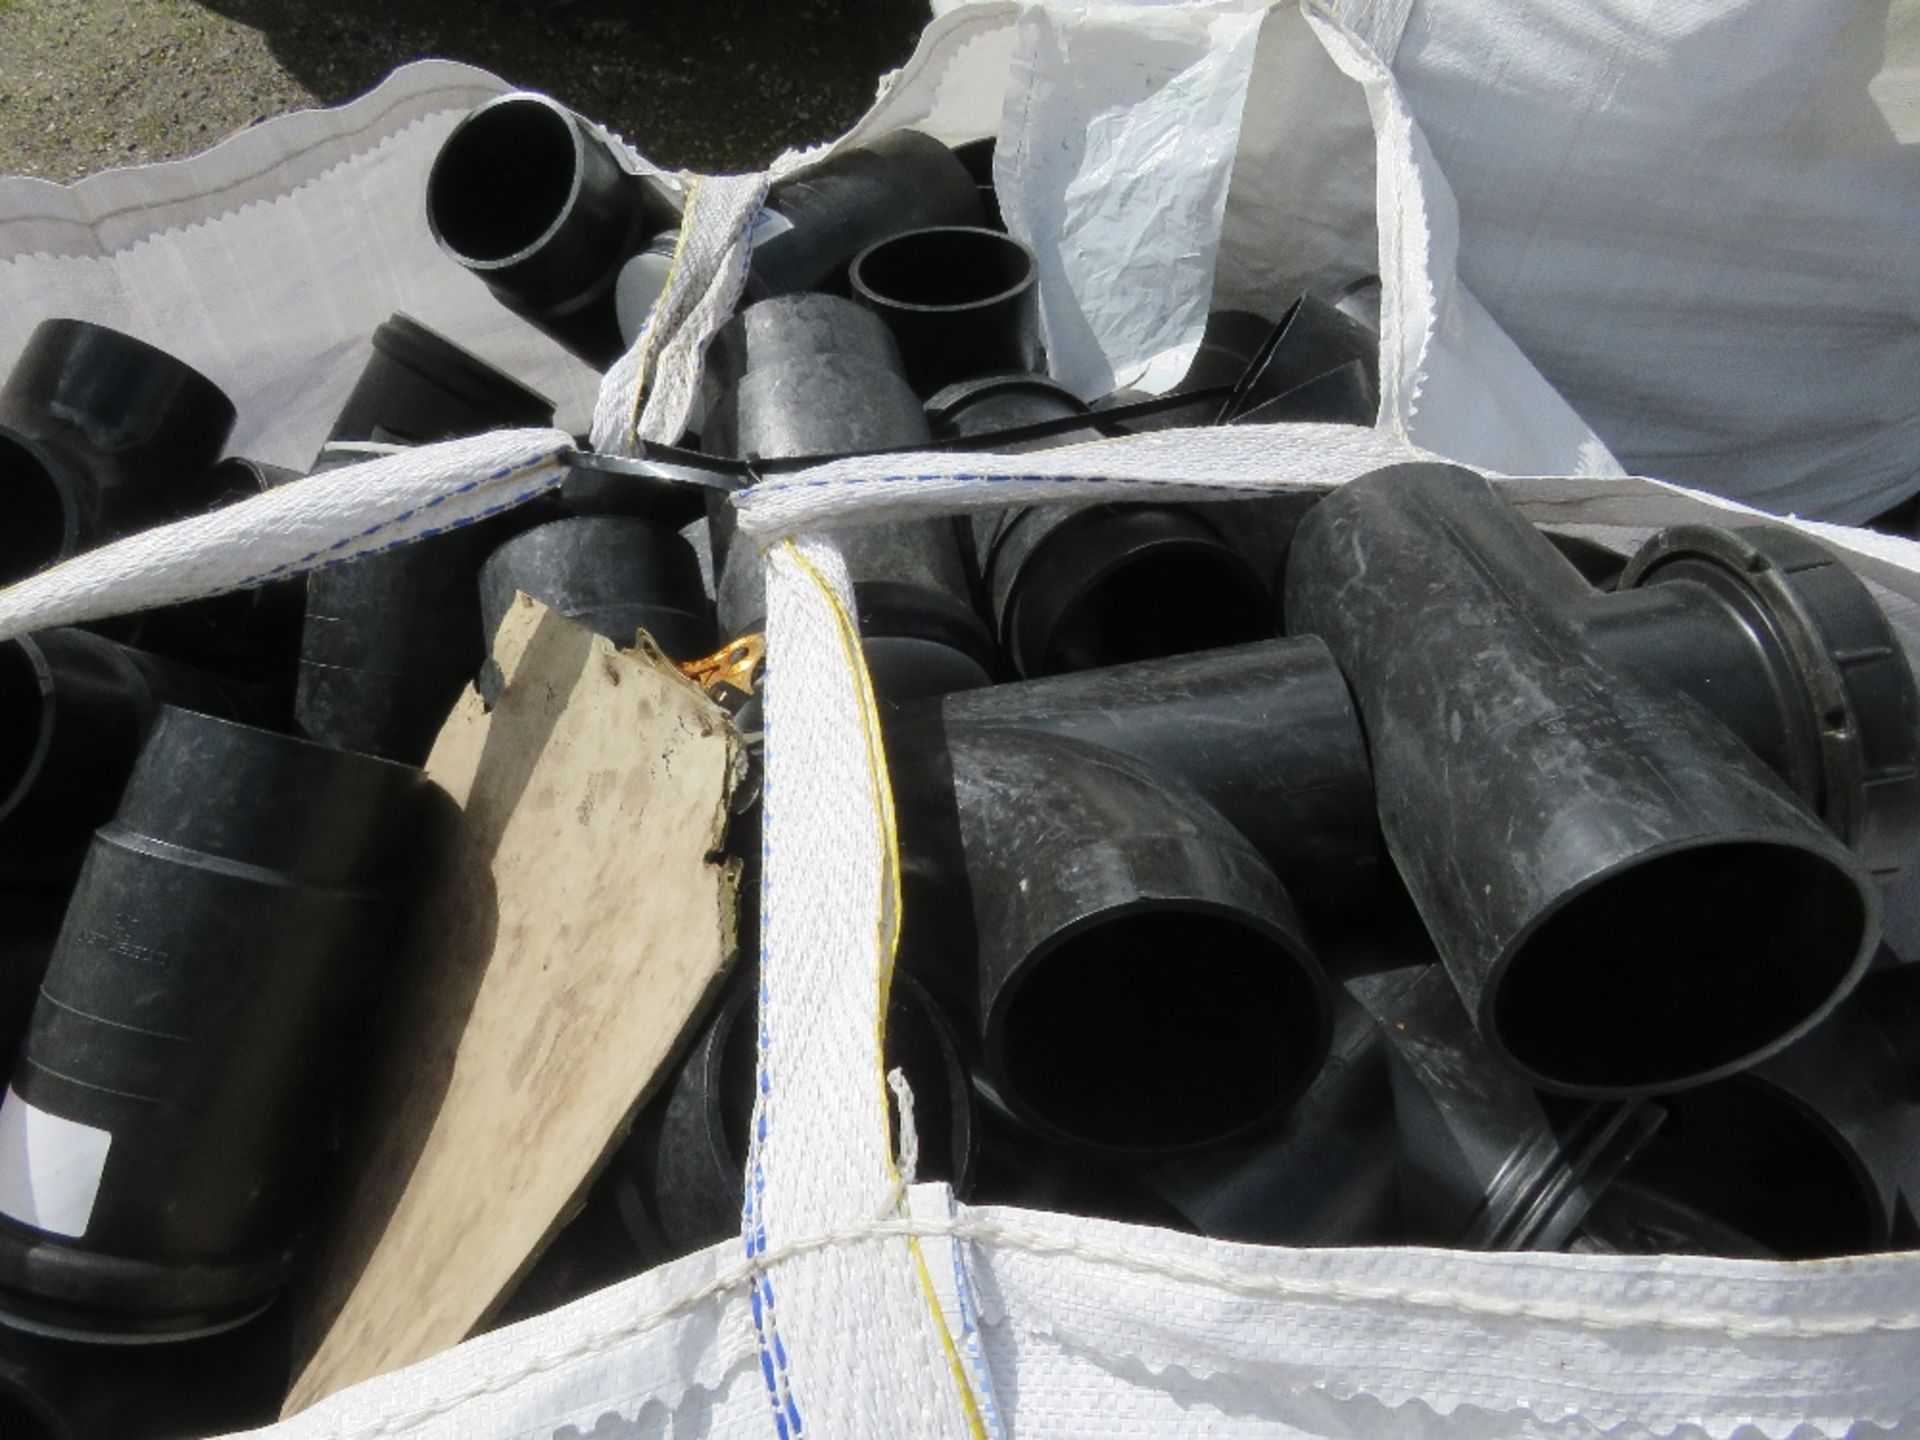 2 X BULK BAGS CONTAINING PLASTIC PIPE JOINTS AND FITTINGS. - Image 5 of 5